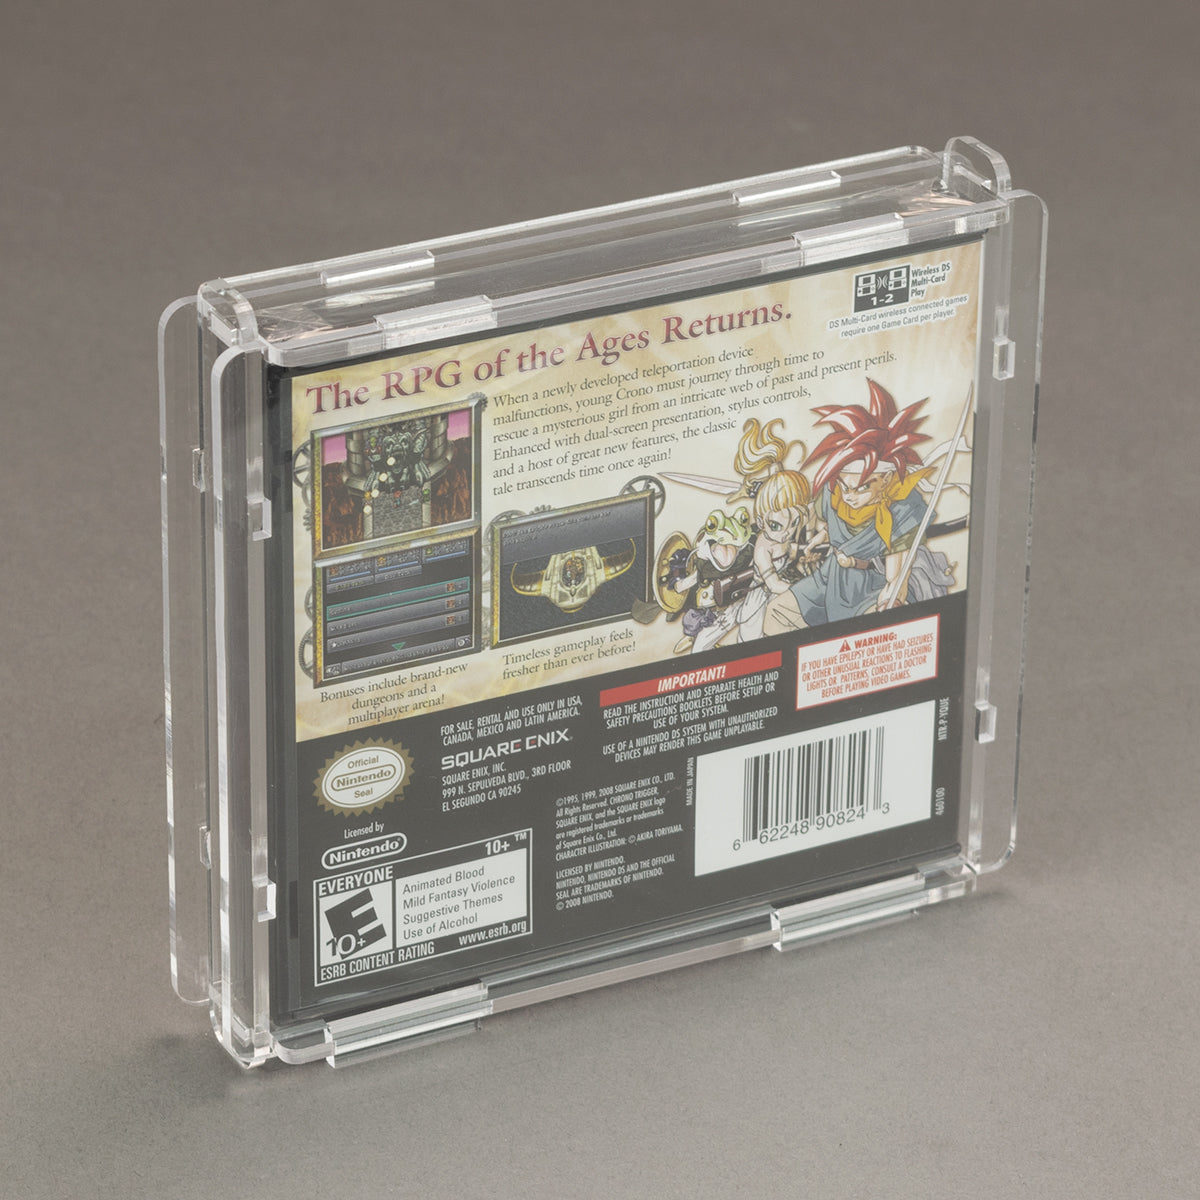 jeans Mince Show Nintendo DS Game Box - Köffin Protective Display Case – Rose Colored Gaming